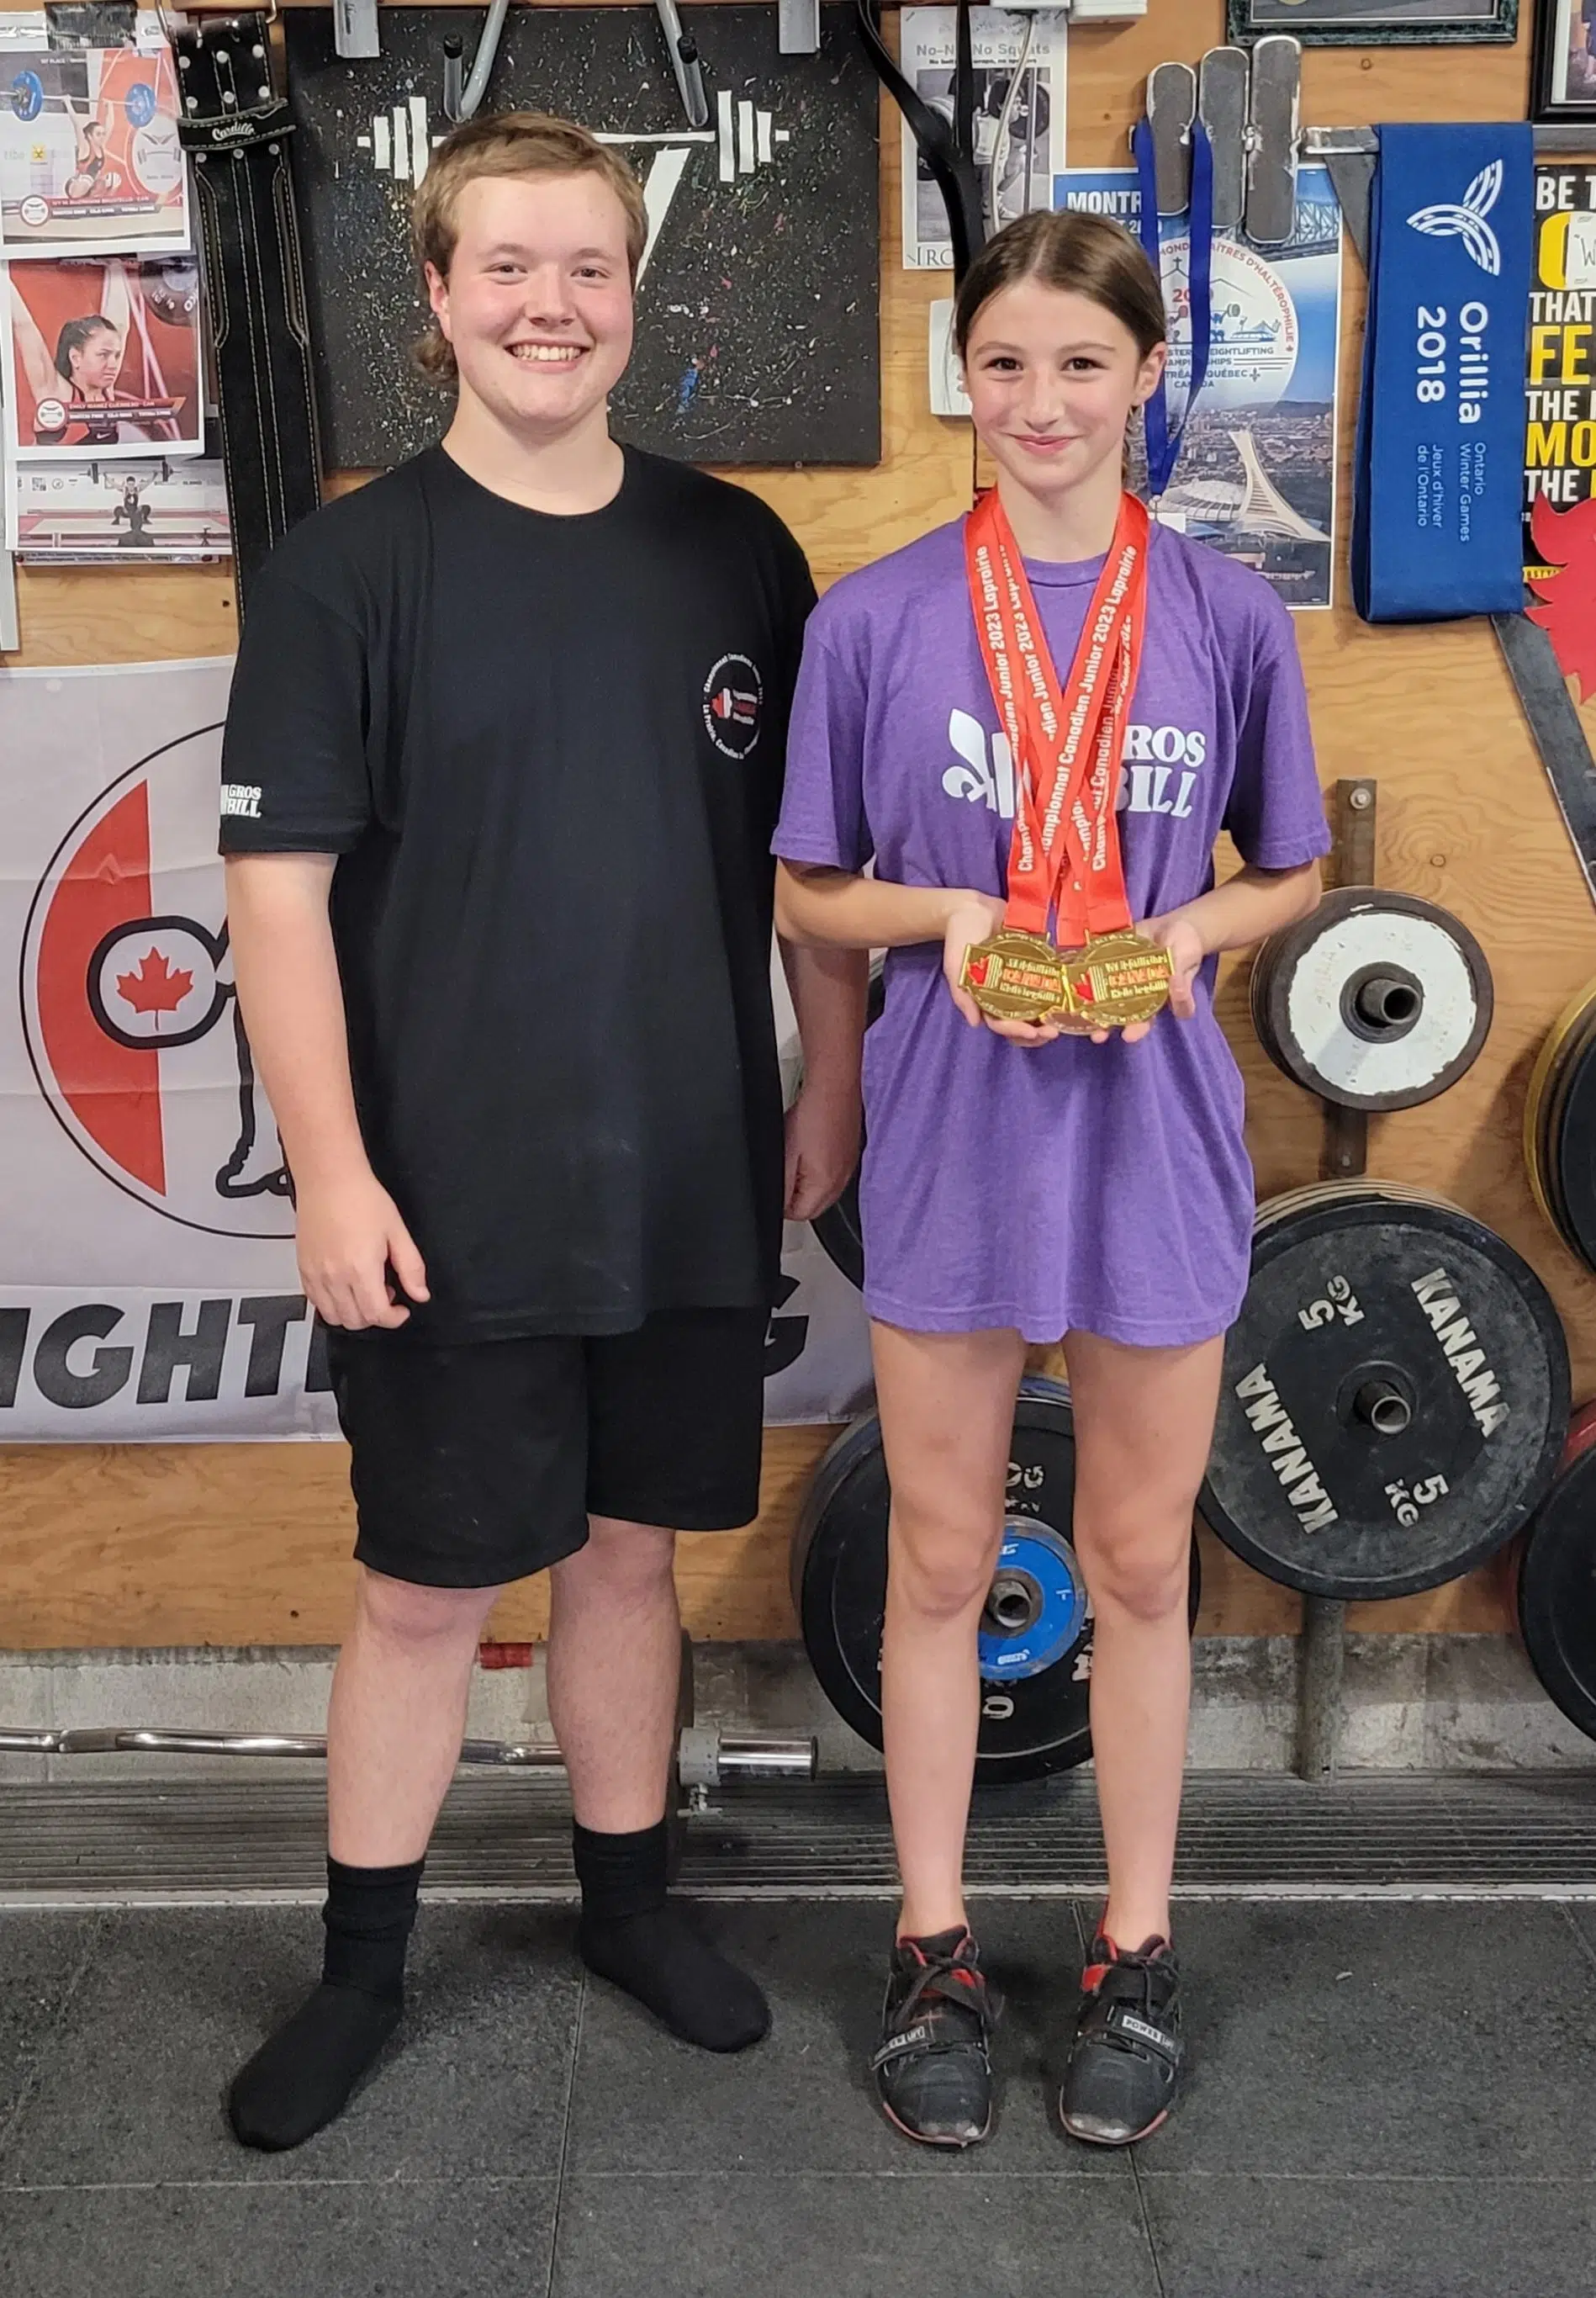 Tyrer wins gold at National Weightlifting Championships